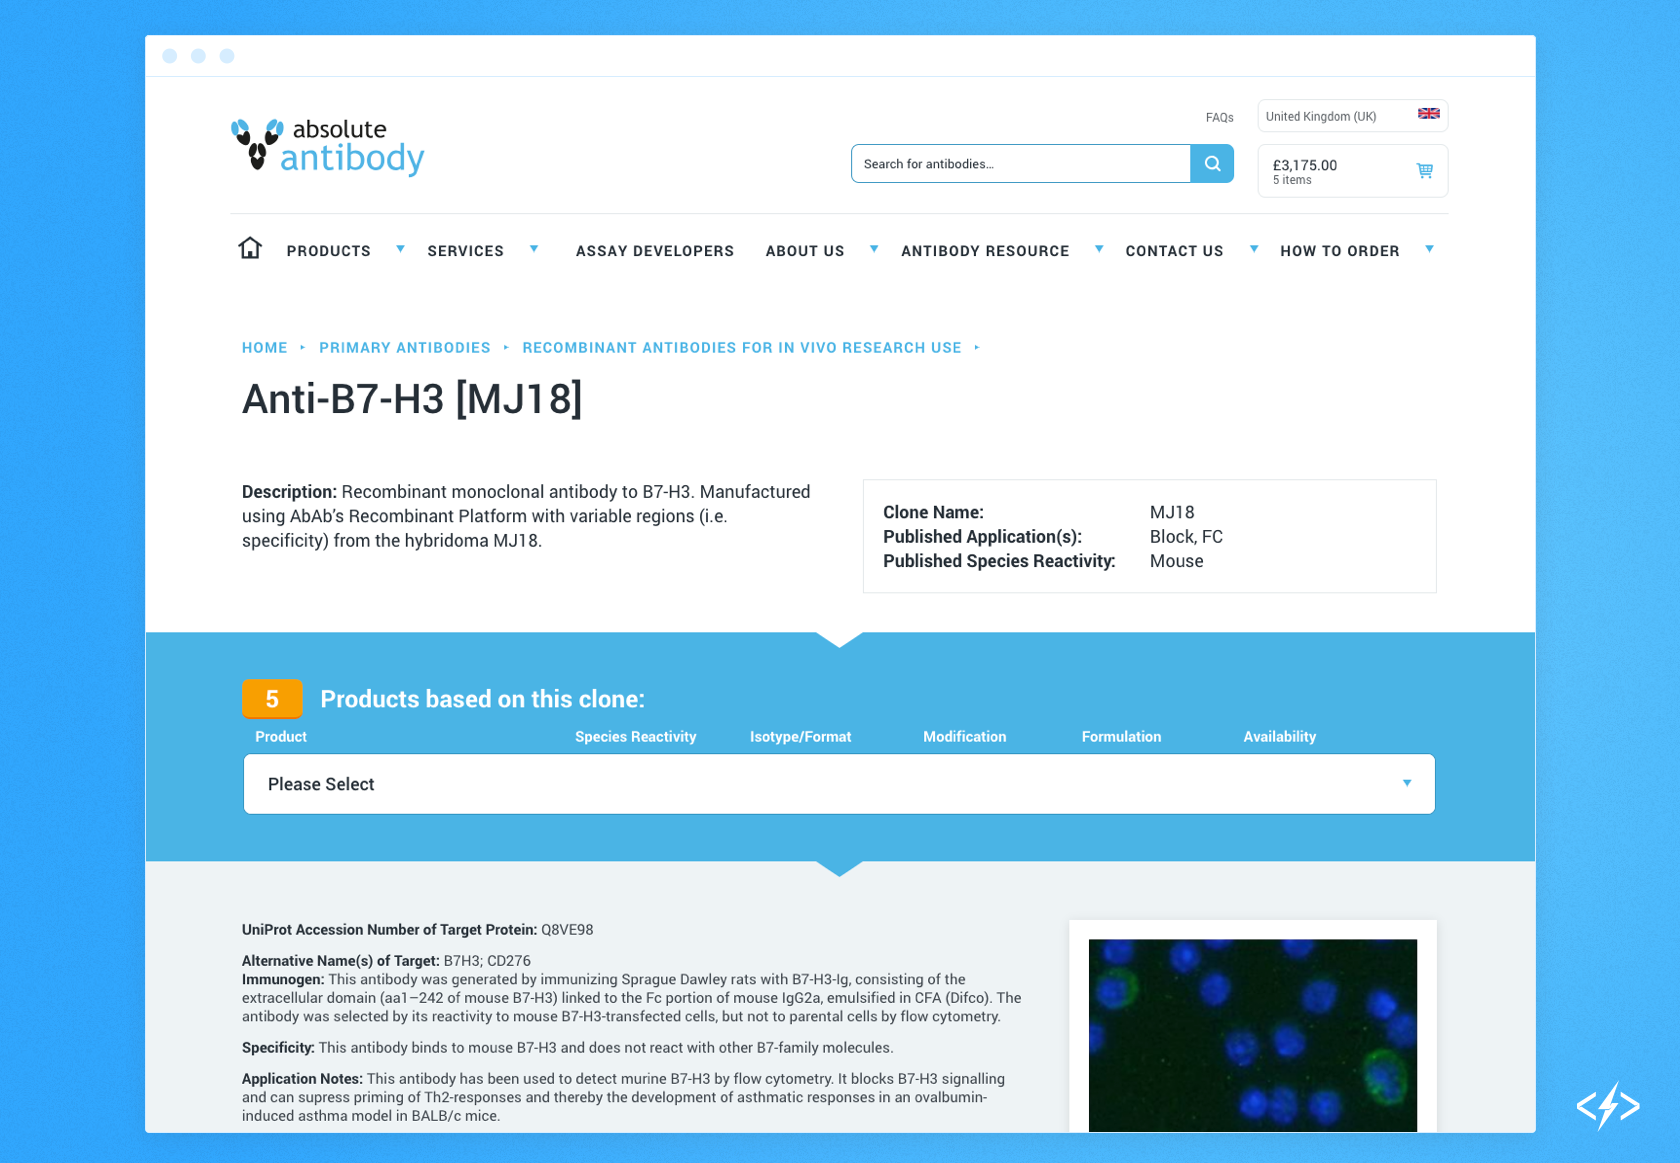 An antibody product page using Ajax calls to pull in different levels of product information